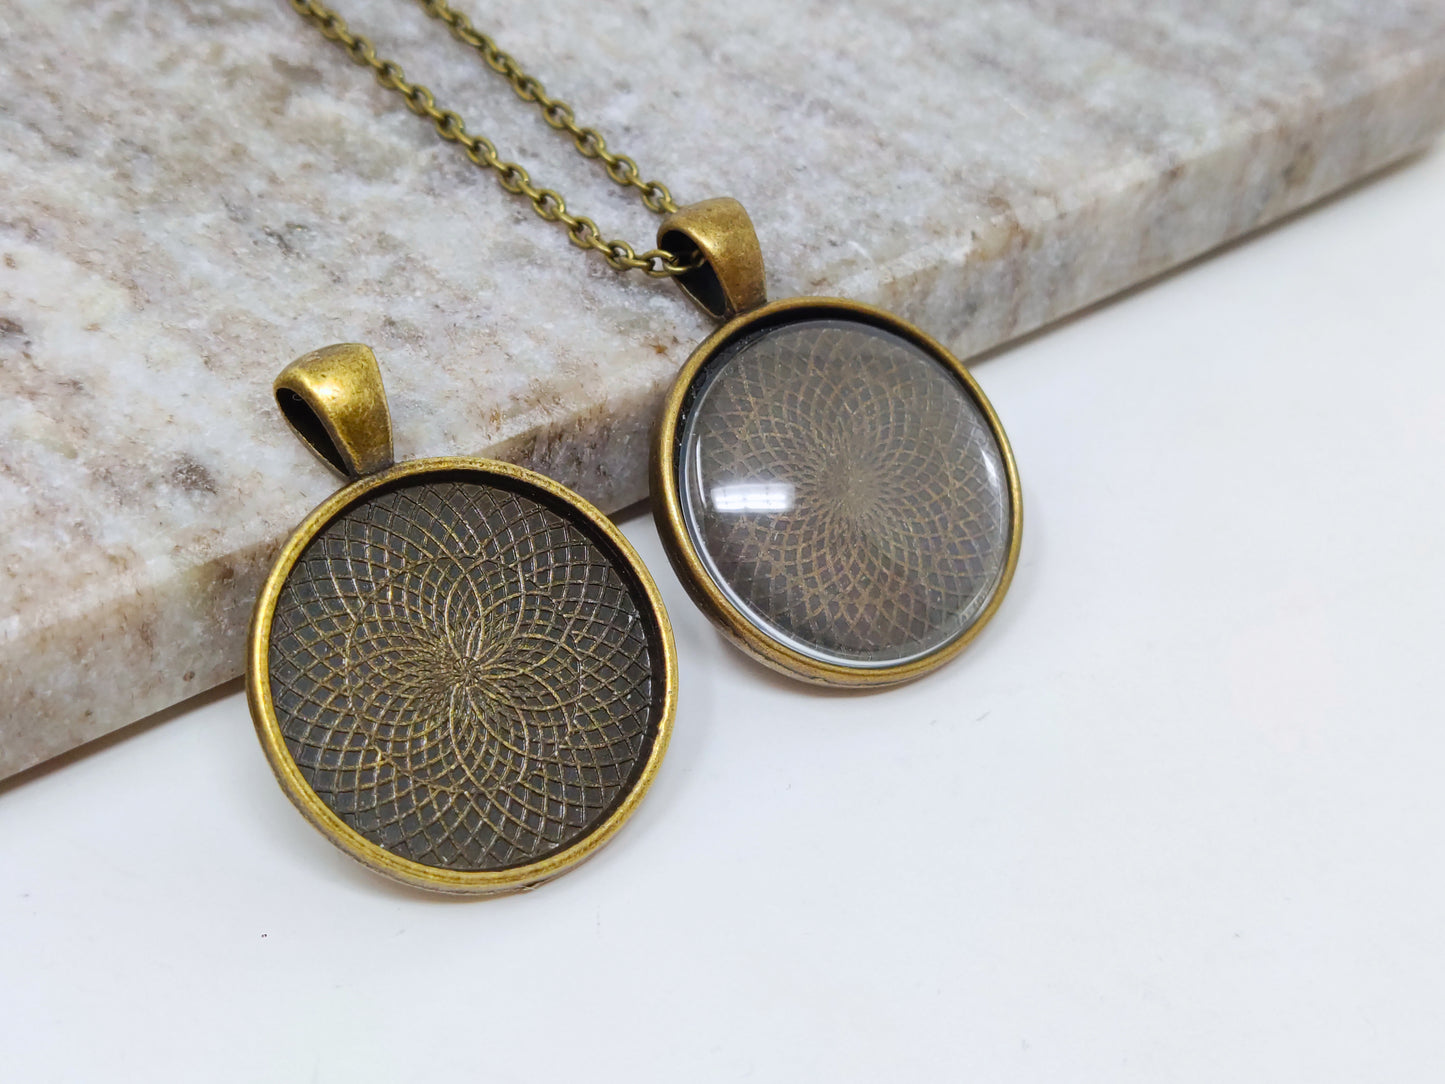 Create Handmade Jewelry with our pendant setting. This 25mm round bezel pendant jewelry settings are suitable for jewelry making and other DIY crafts. You can use these pendant tray kits to make your own photo jewelry, pendant necklaces, earrings.